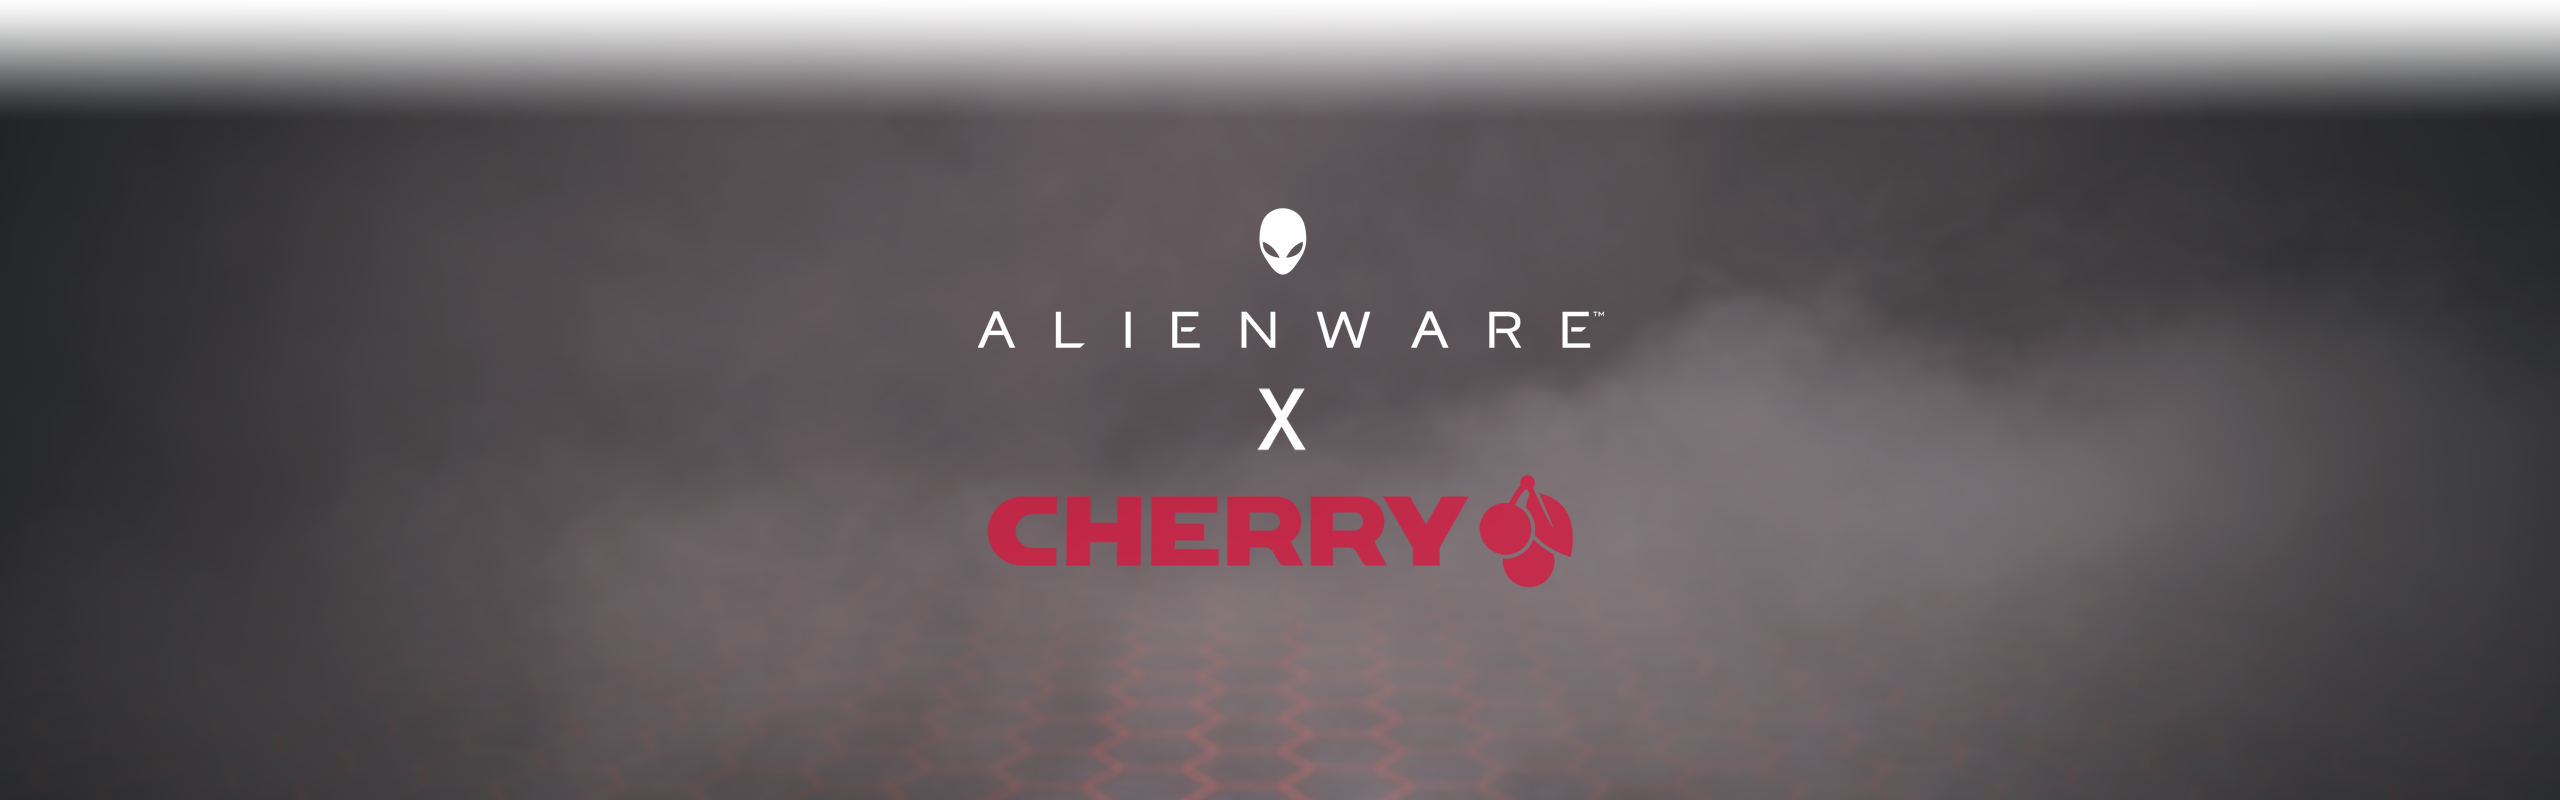 Alienware Debuts the World’s First Gaming Laptop with CHERRY MX Ultra-Low Profile Mechanical Keys